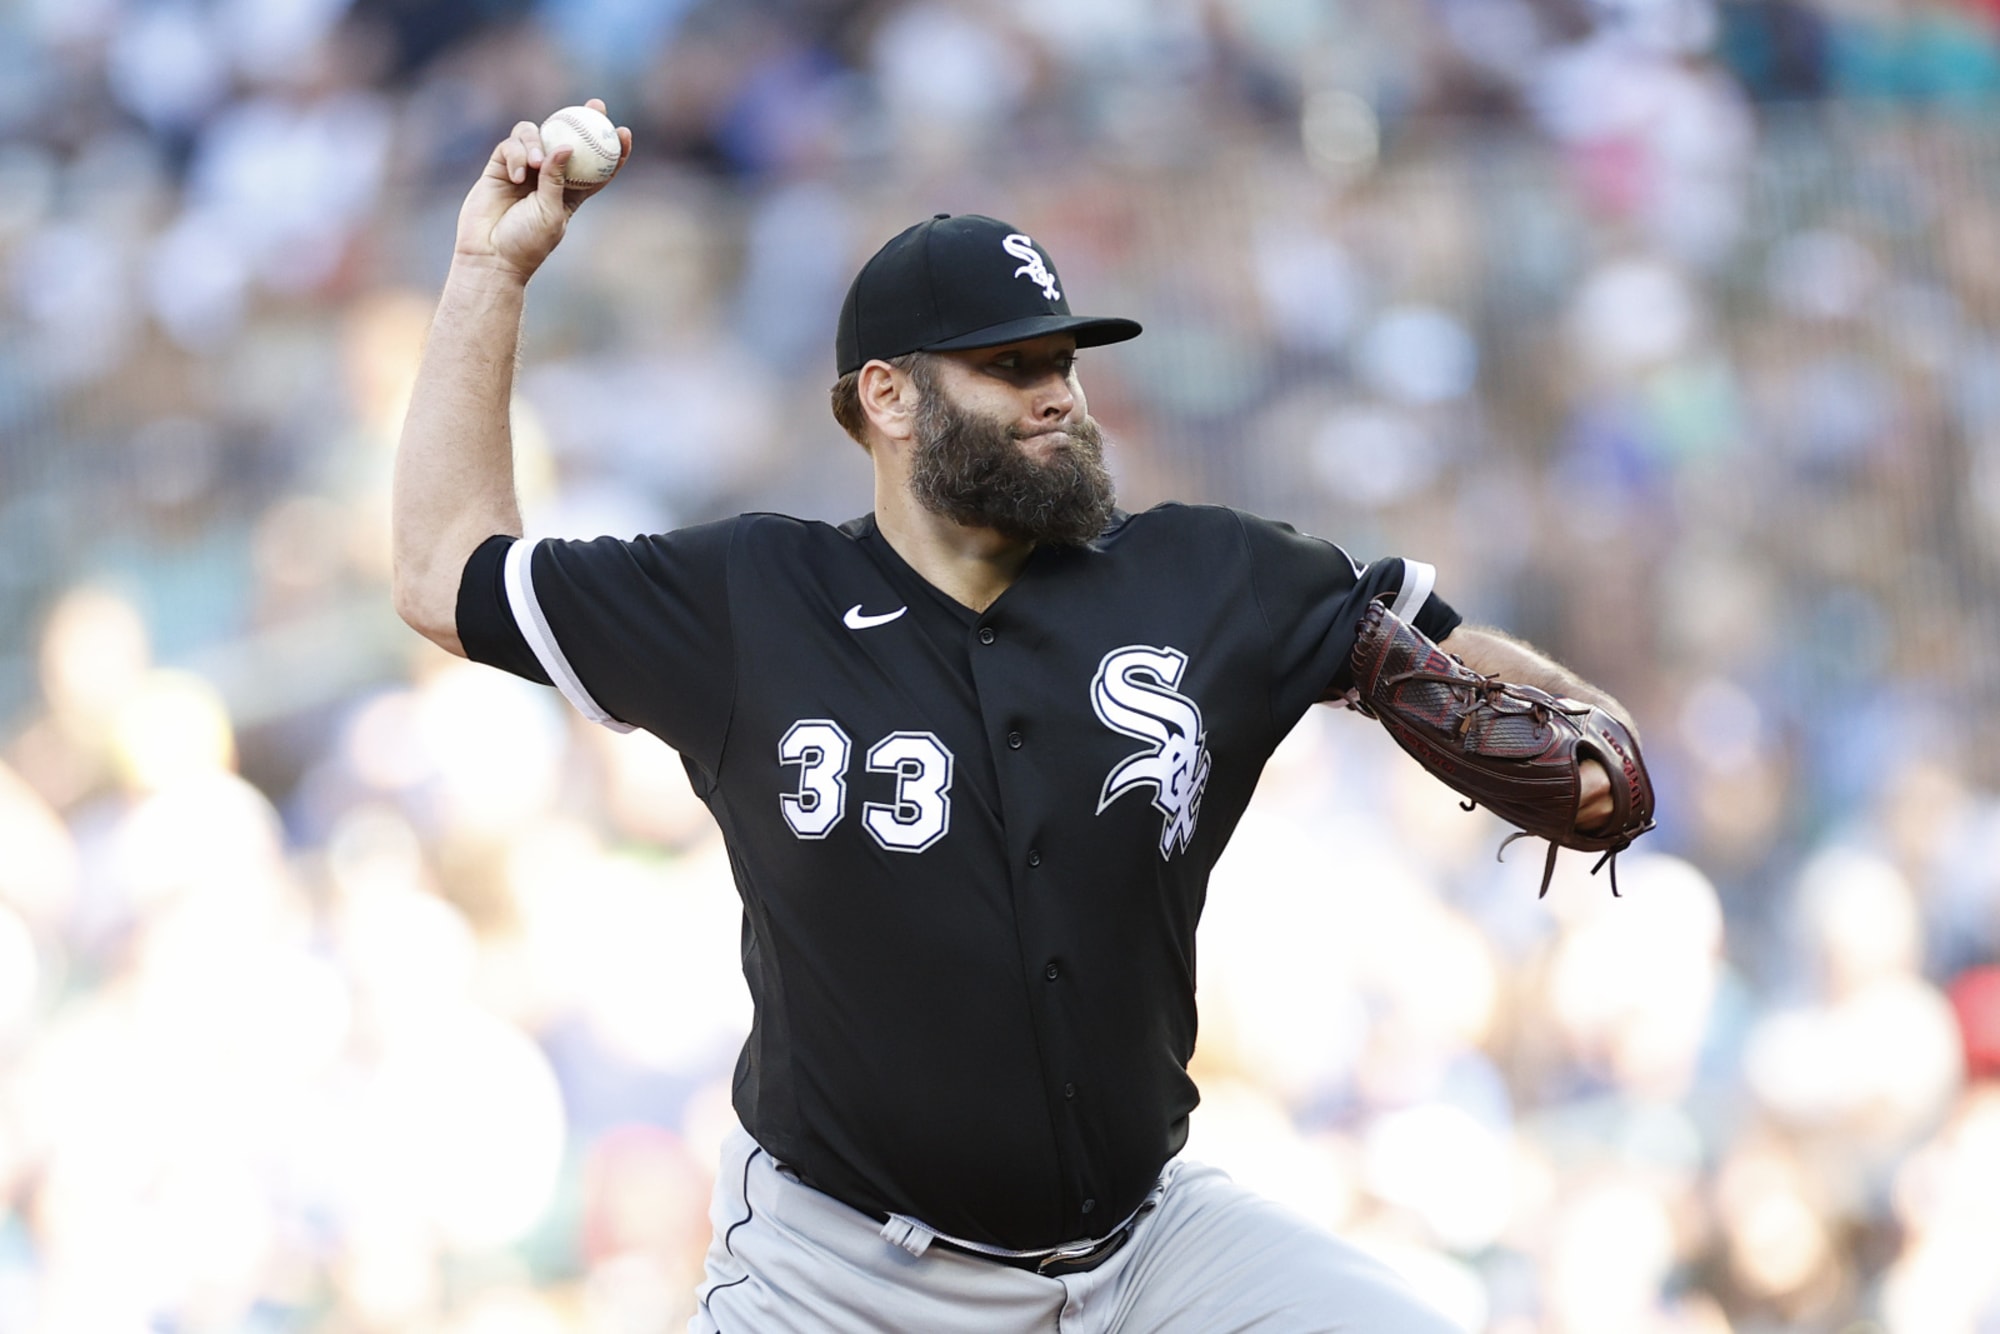 The White Sox take a thrilling must-win game over Mariners - BVM Sports